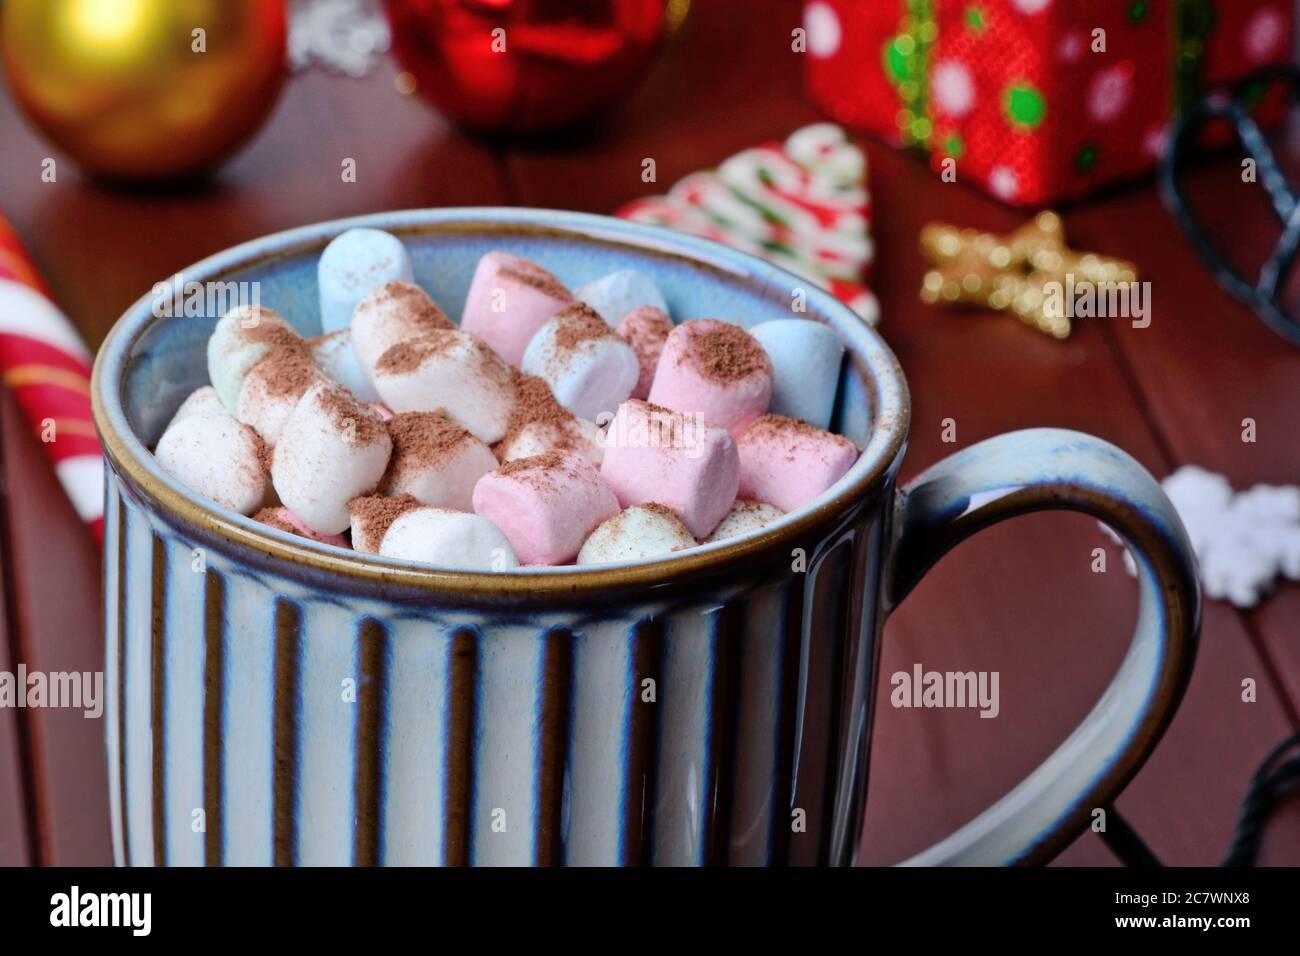 Hot chocolate in a mug on a wood table close-up Stock Photo